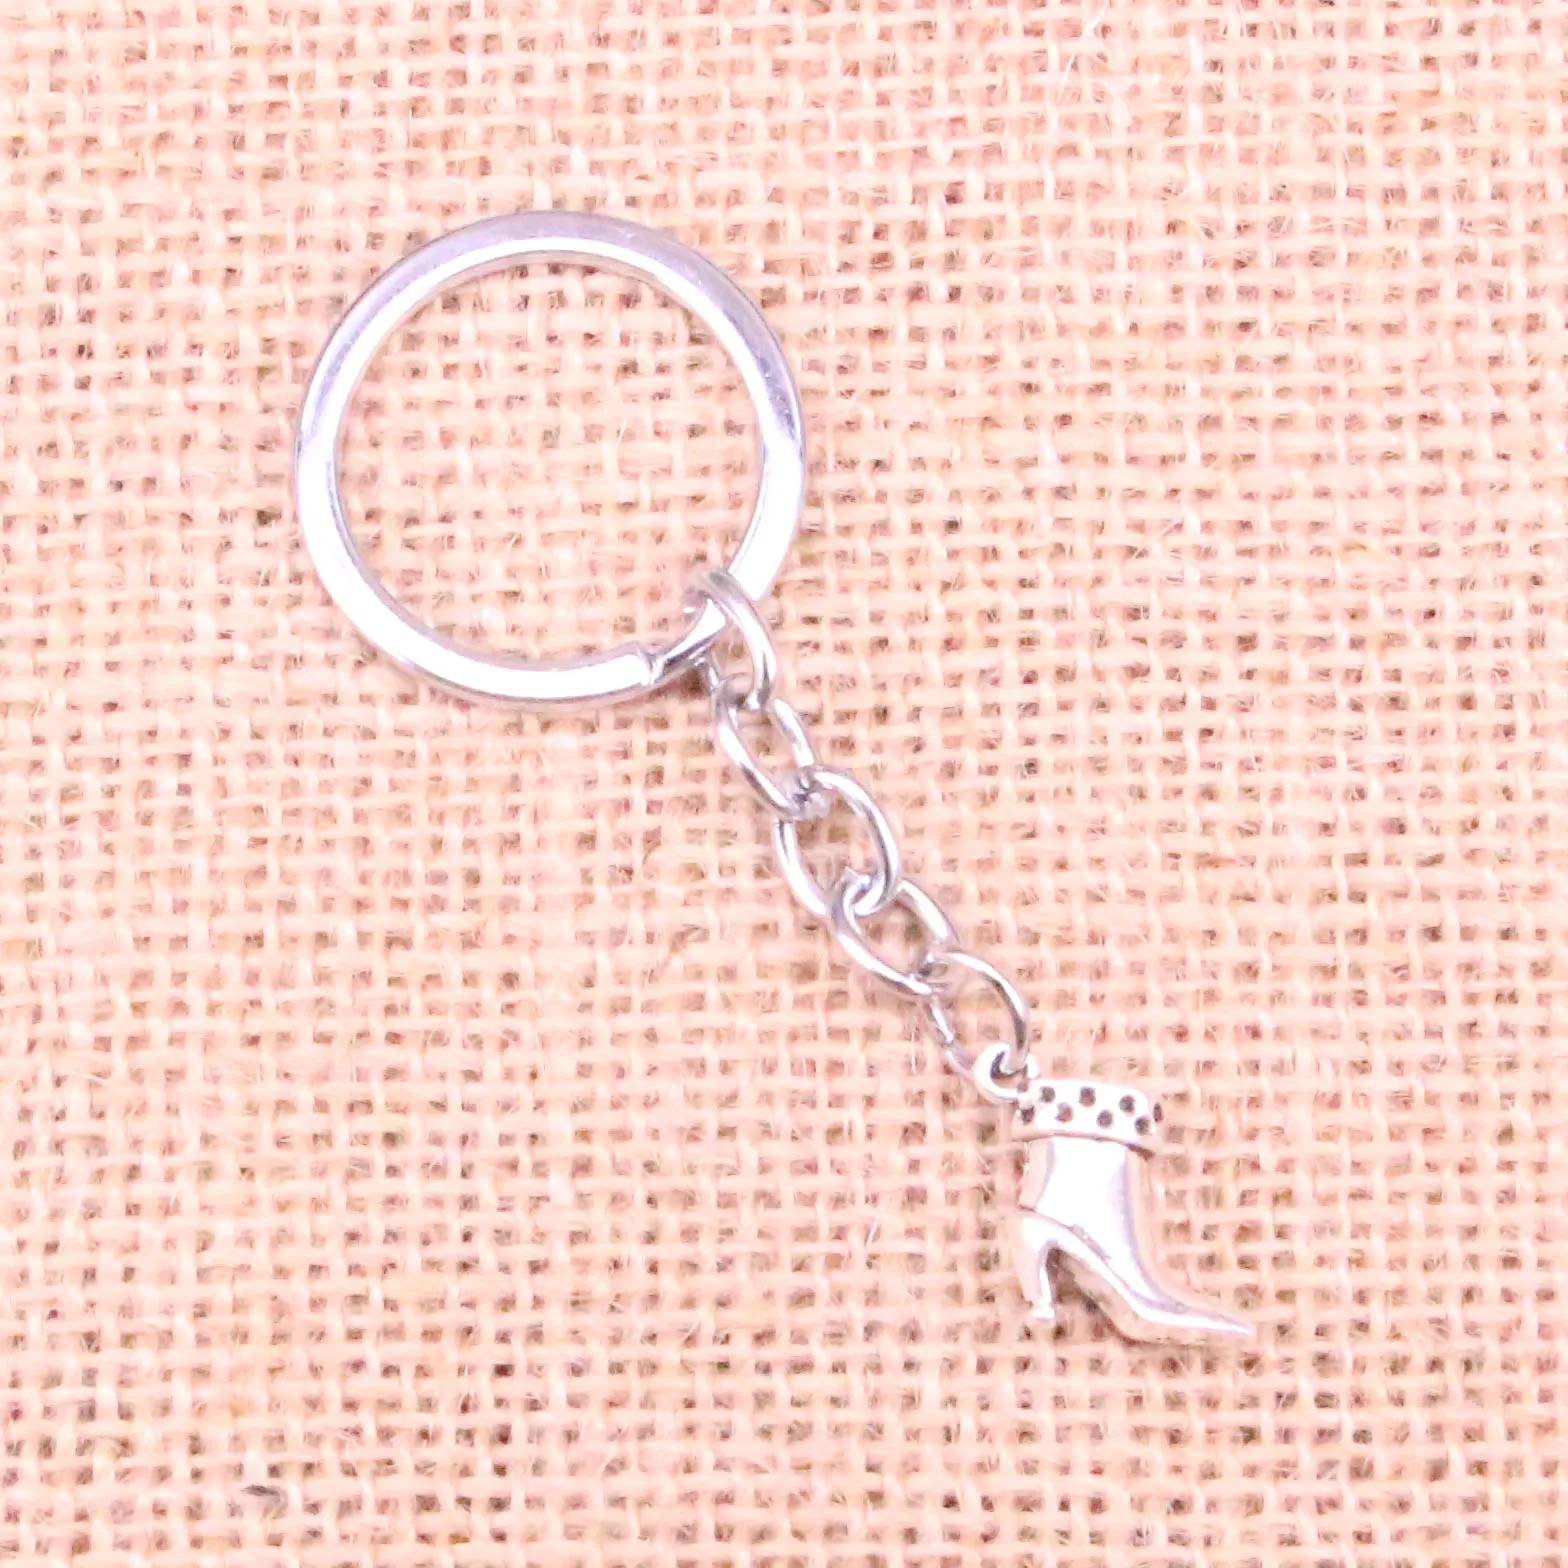 New Keychain 13*13*5mm high heeled shoes boots Pendants DIY Men Car Key Chain Ring Holder Keyring Souvenir Jewelry Gift